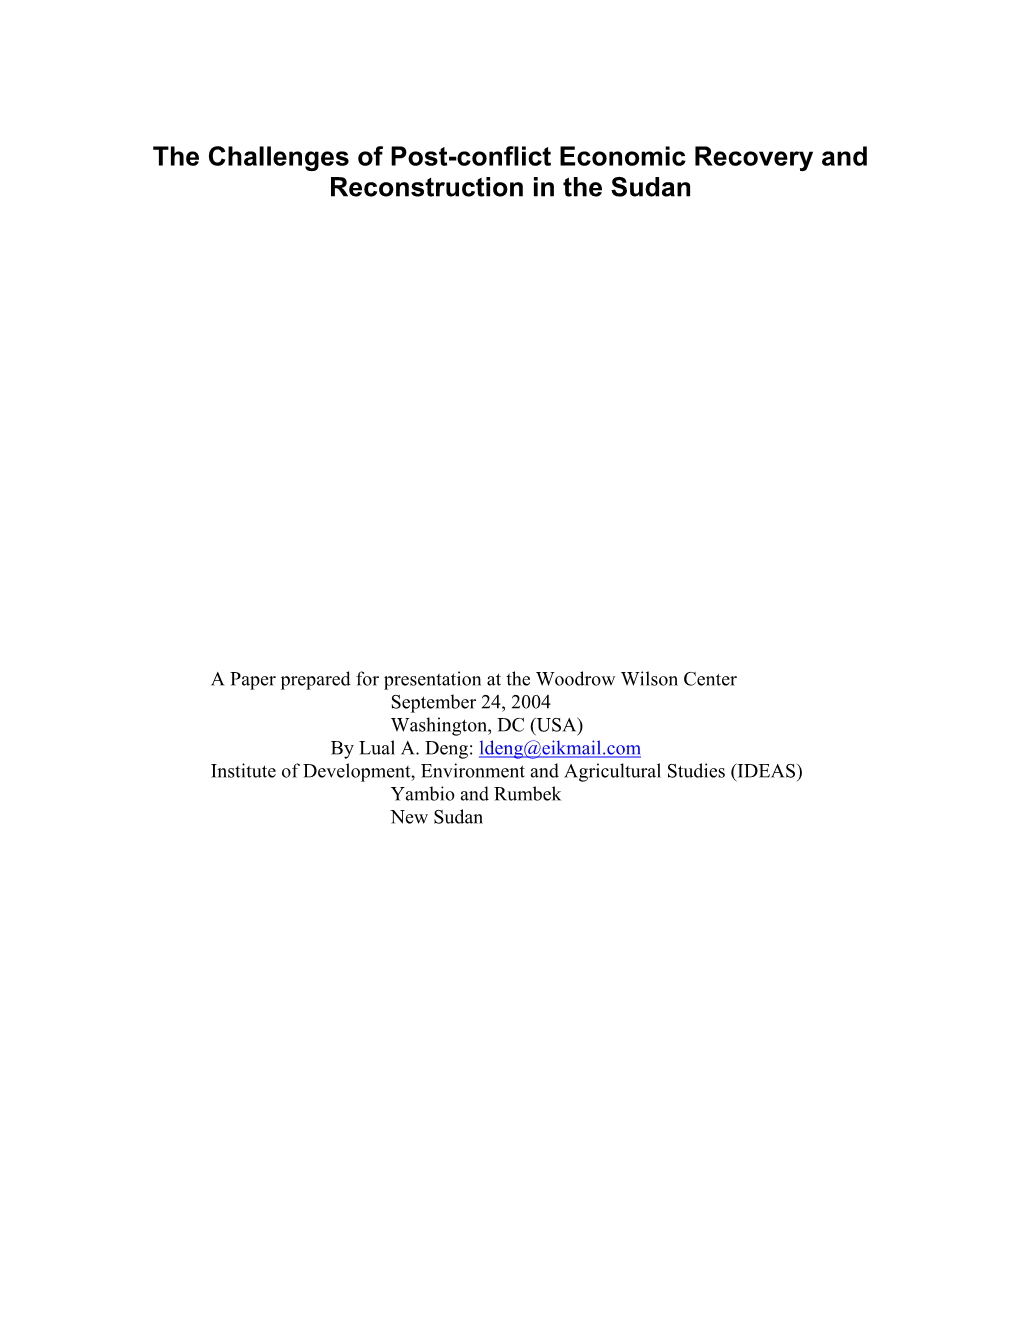 Pre-Conditions for Post-Conflict Economic Recovery And